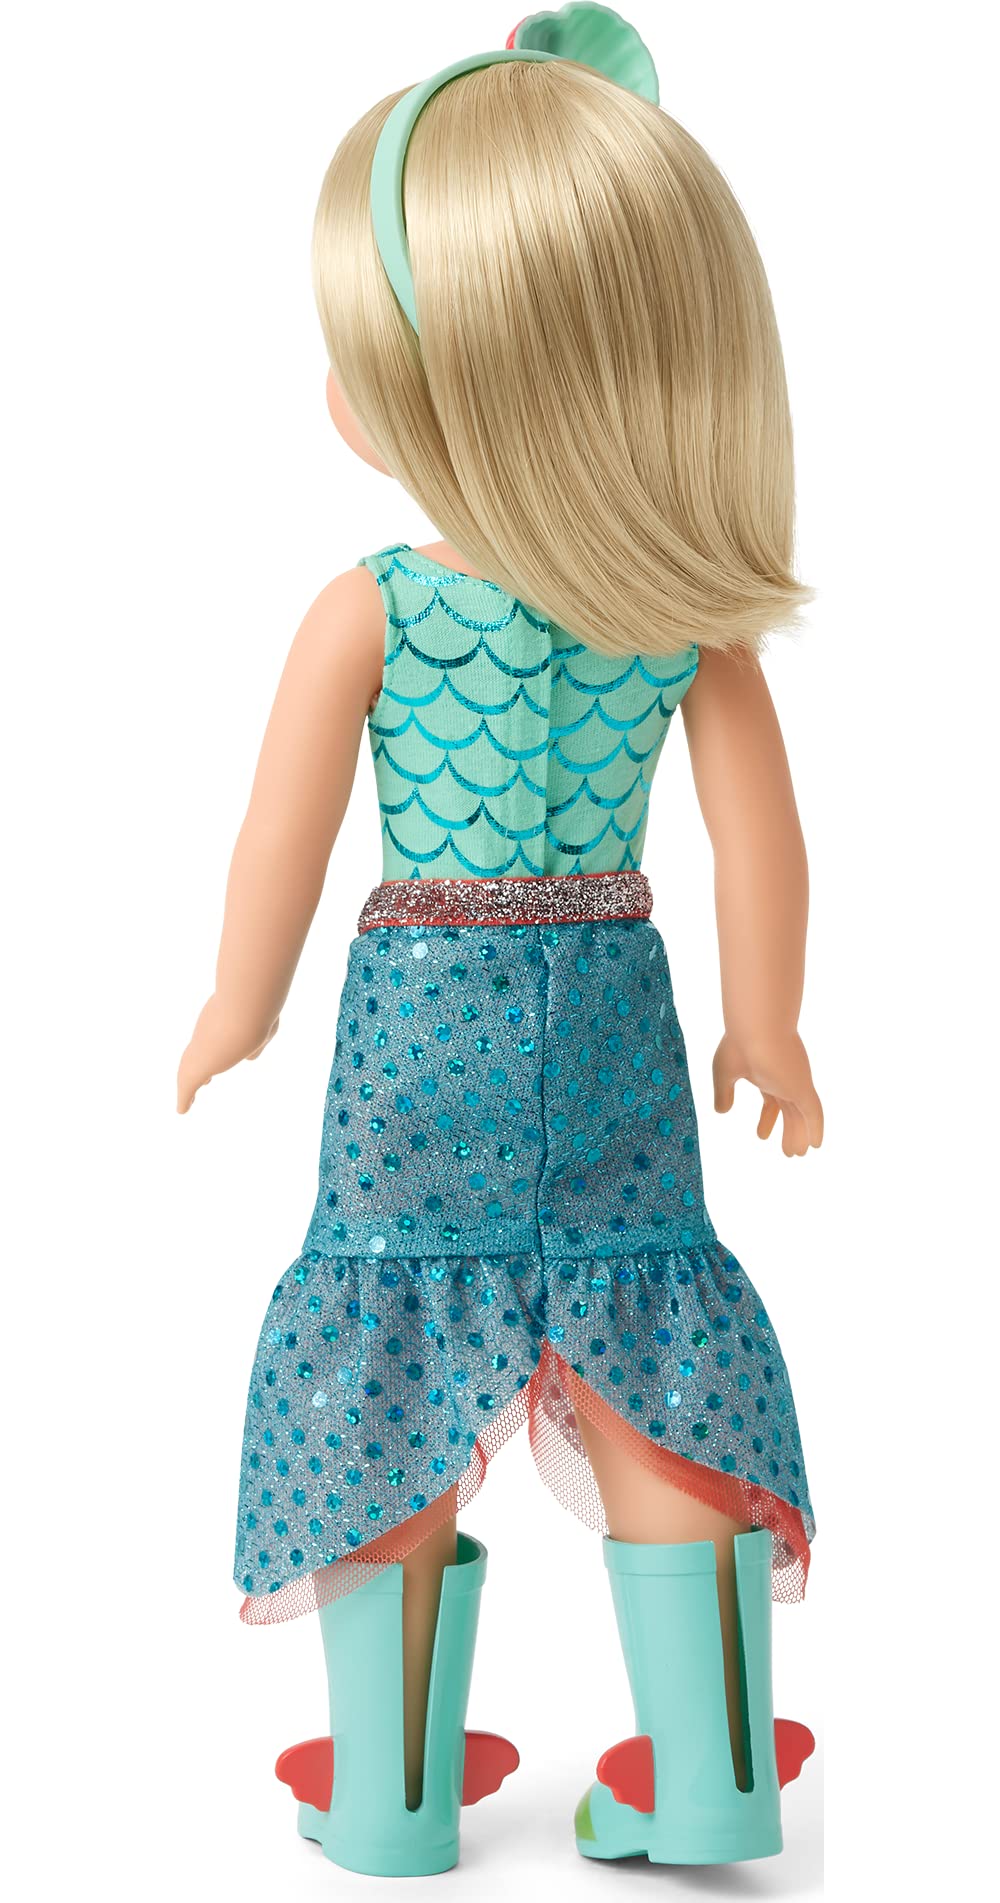 American Girl WellieWishers 14.5-inch Camille Doll with Blue Leotard, Mermaid Skirt, Headband, and Boots, For Ages 4+